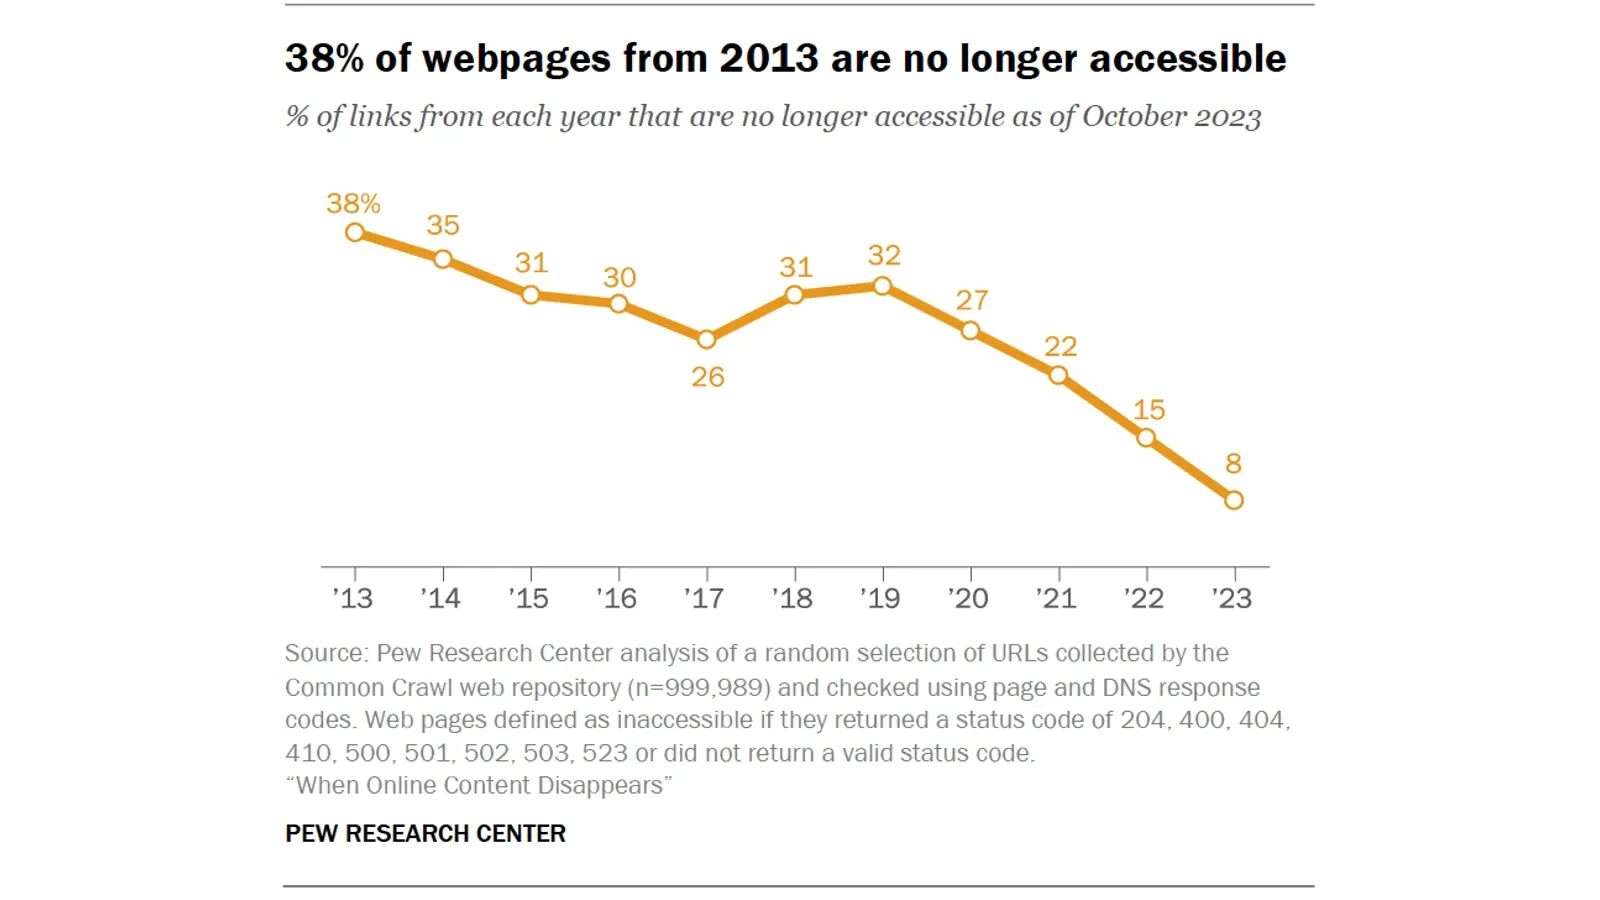 Roughly 25% of webpages sampled from the period 2013-2023 are no longer available as of October 2023